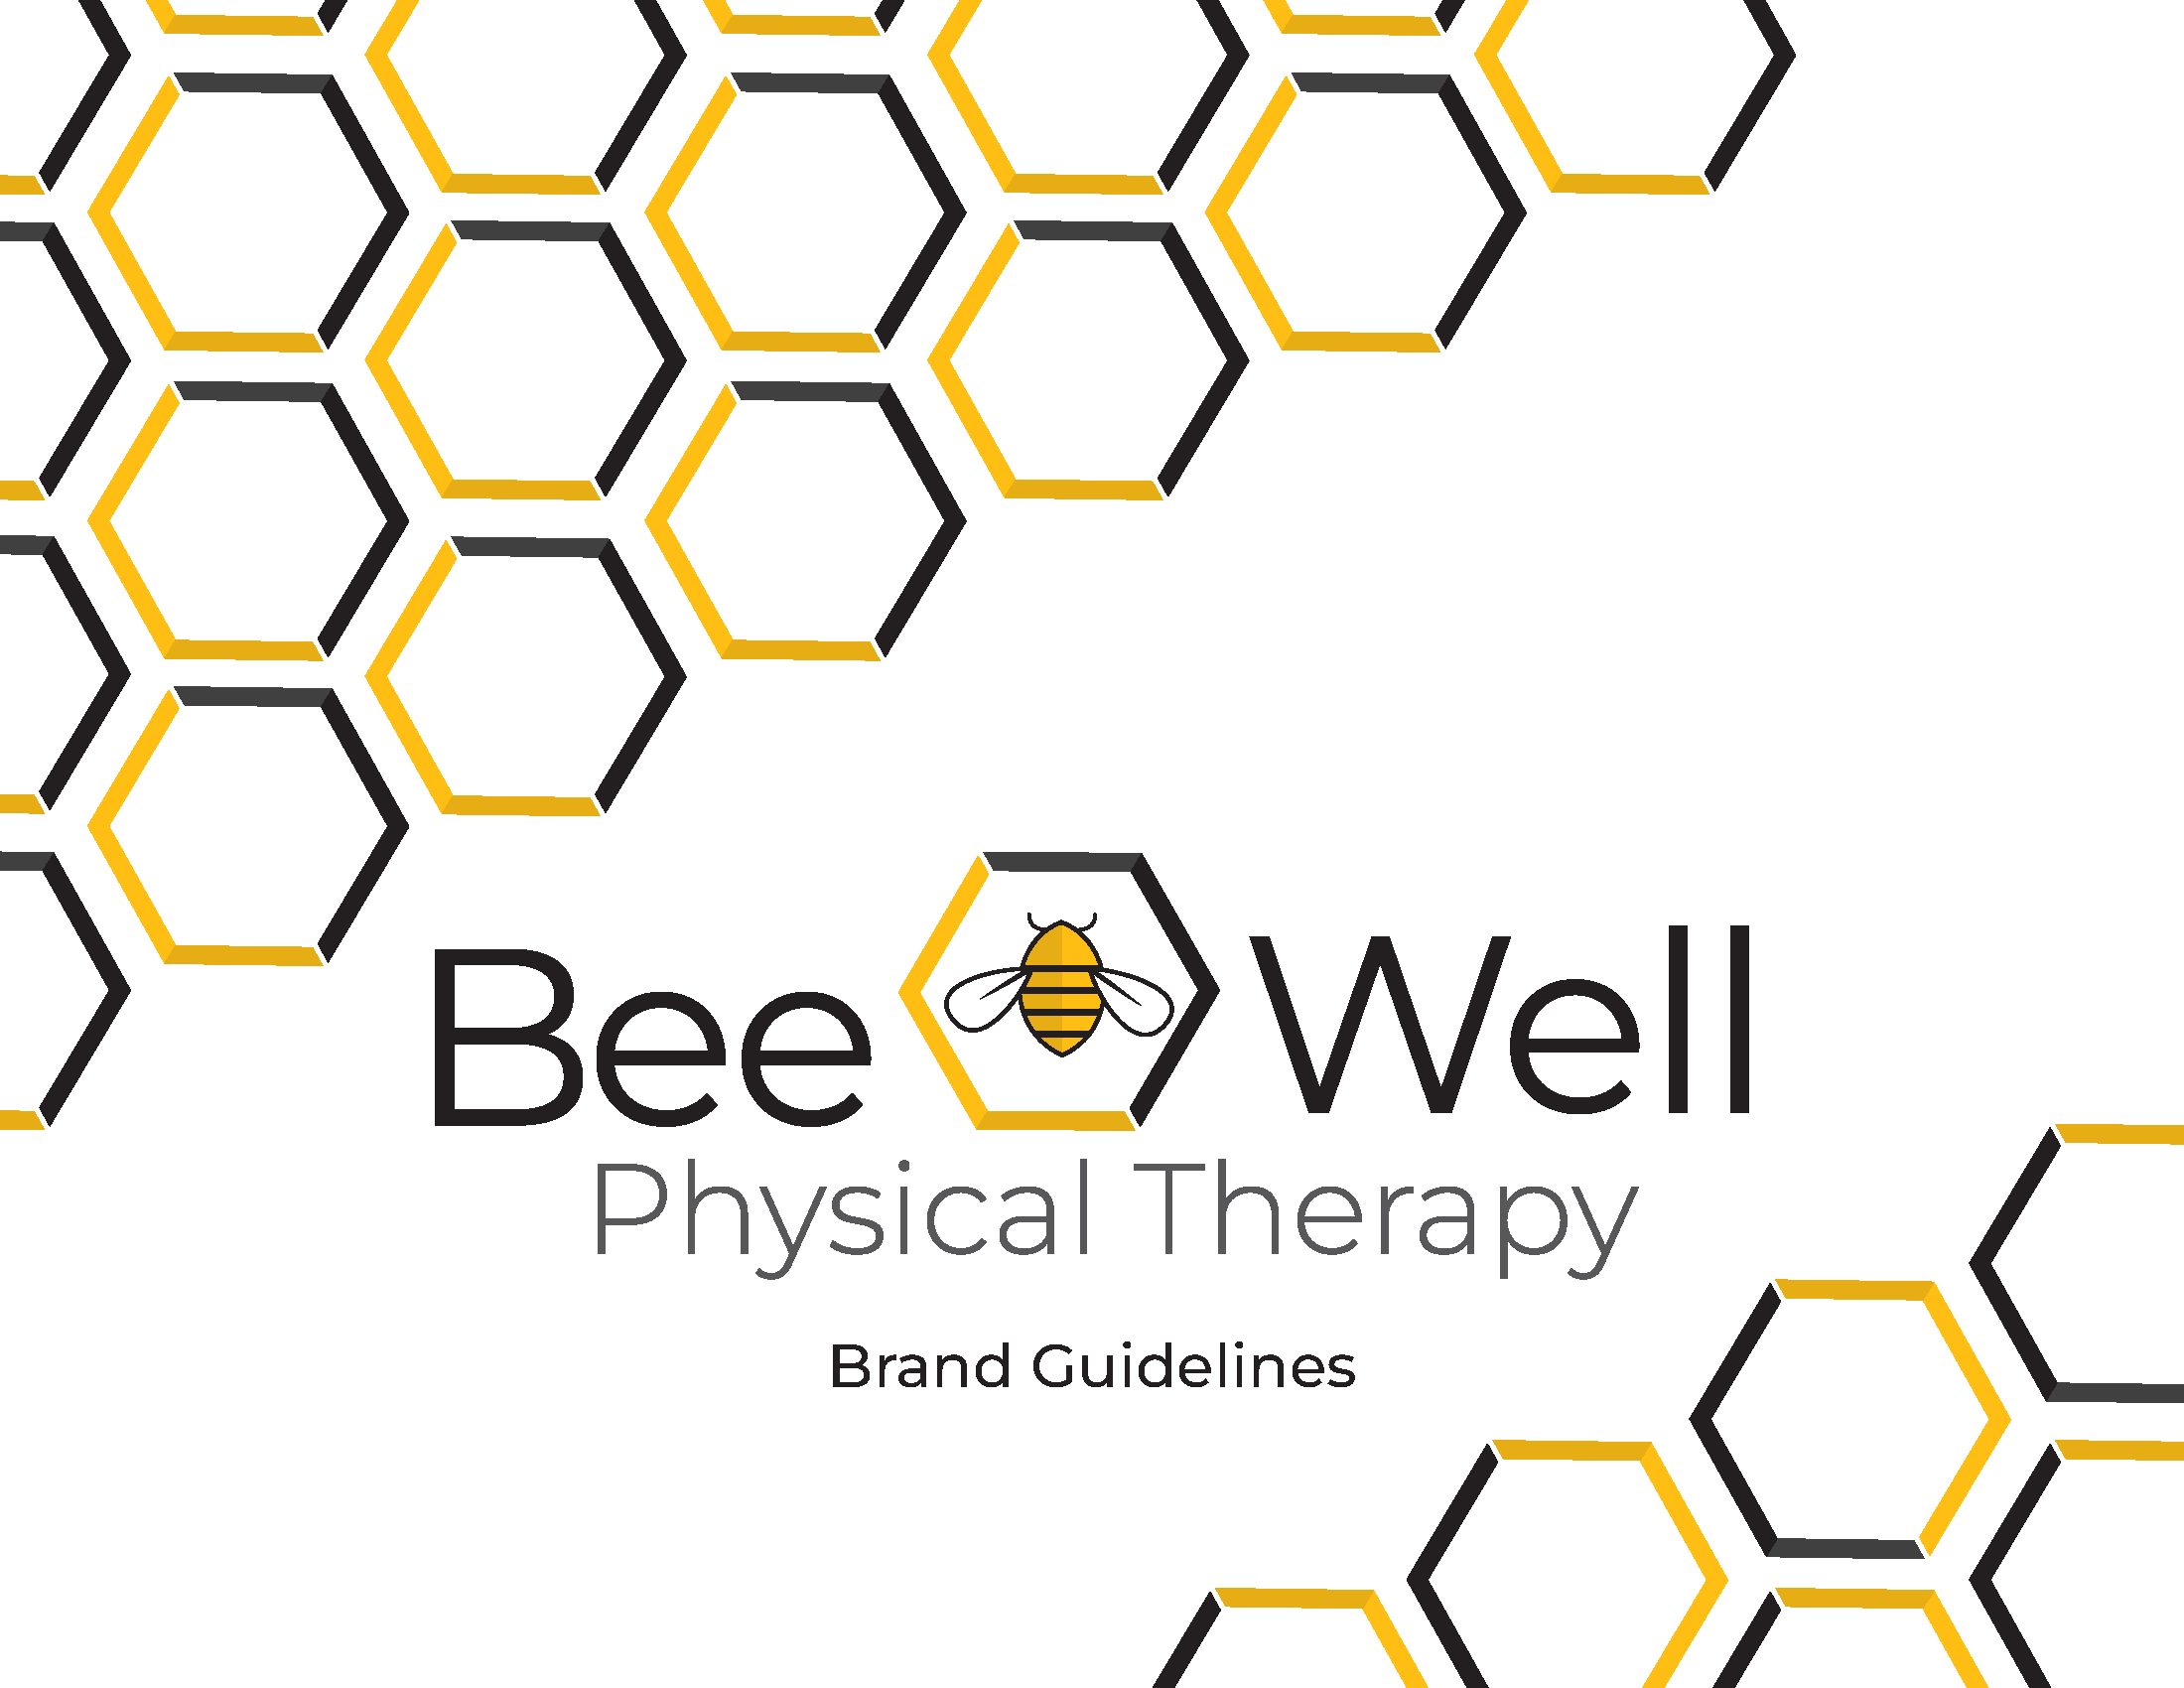 Cover Page for the Bee Well brand guide.